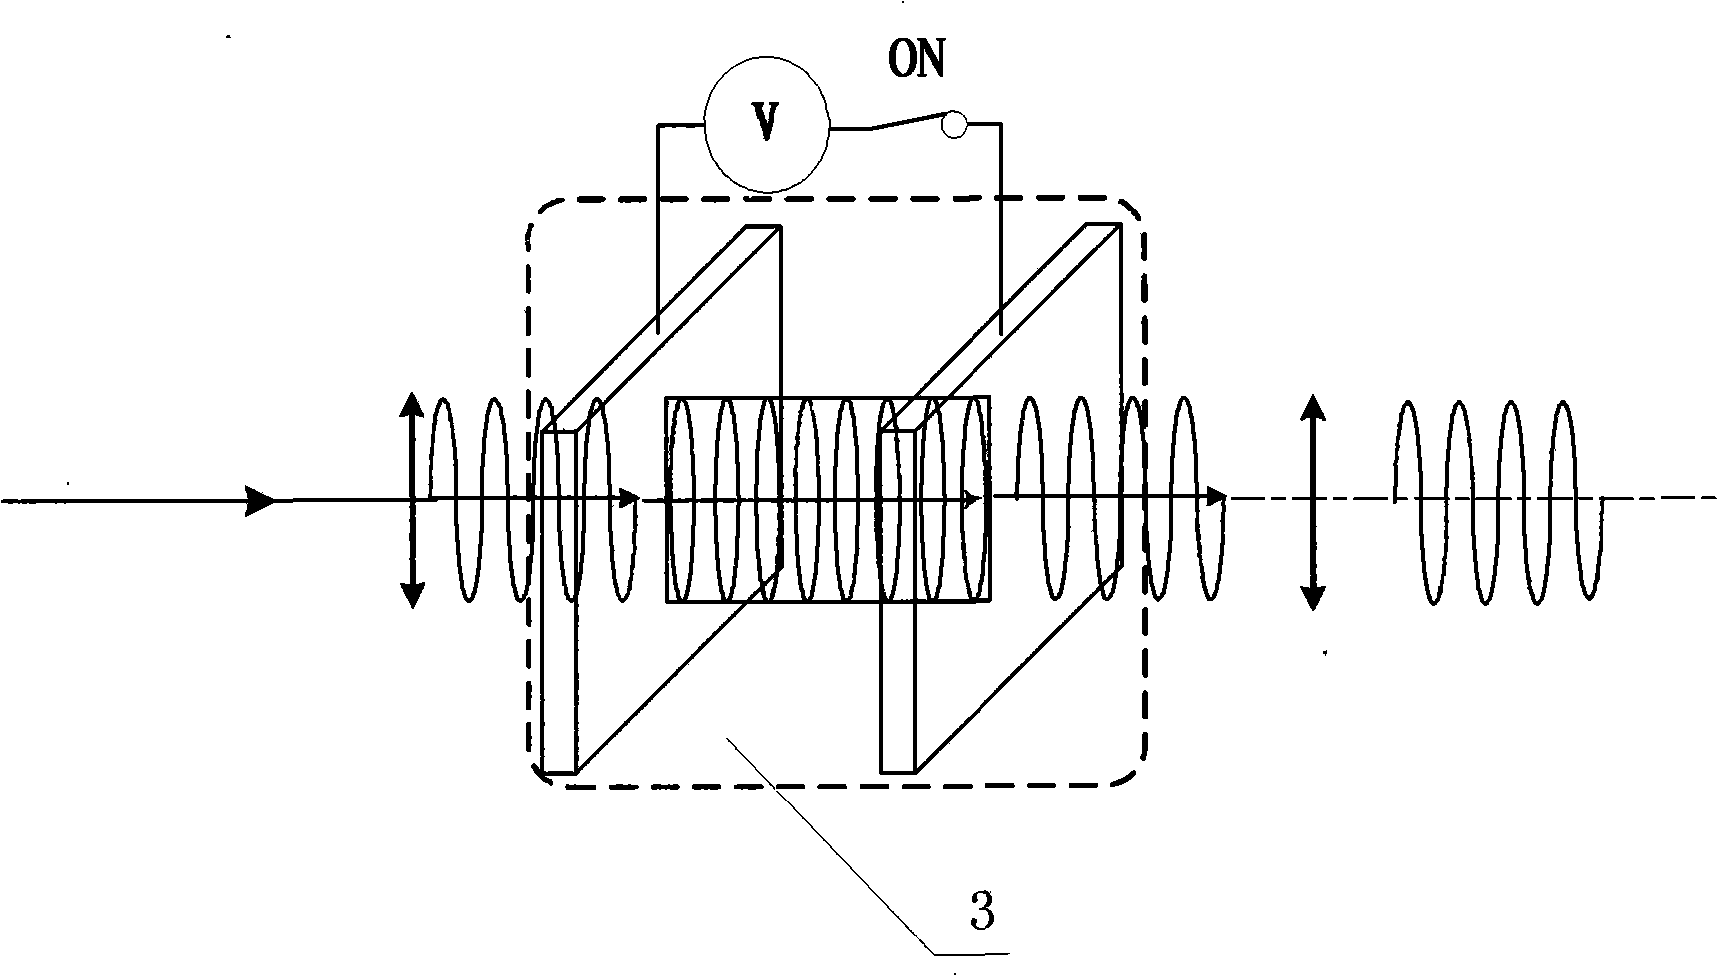 Embedded type polarization state measuring instrument based on LCD